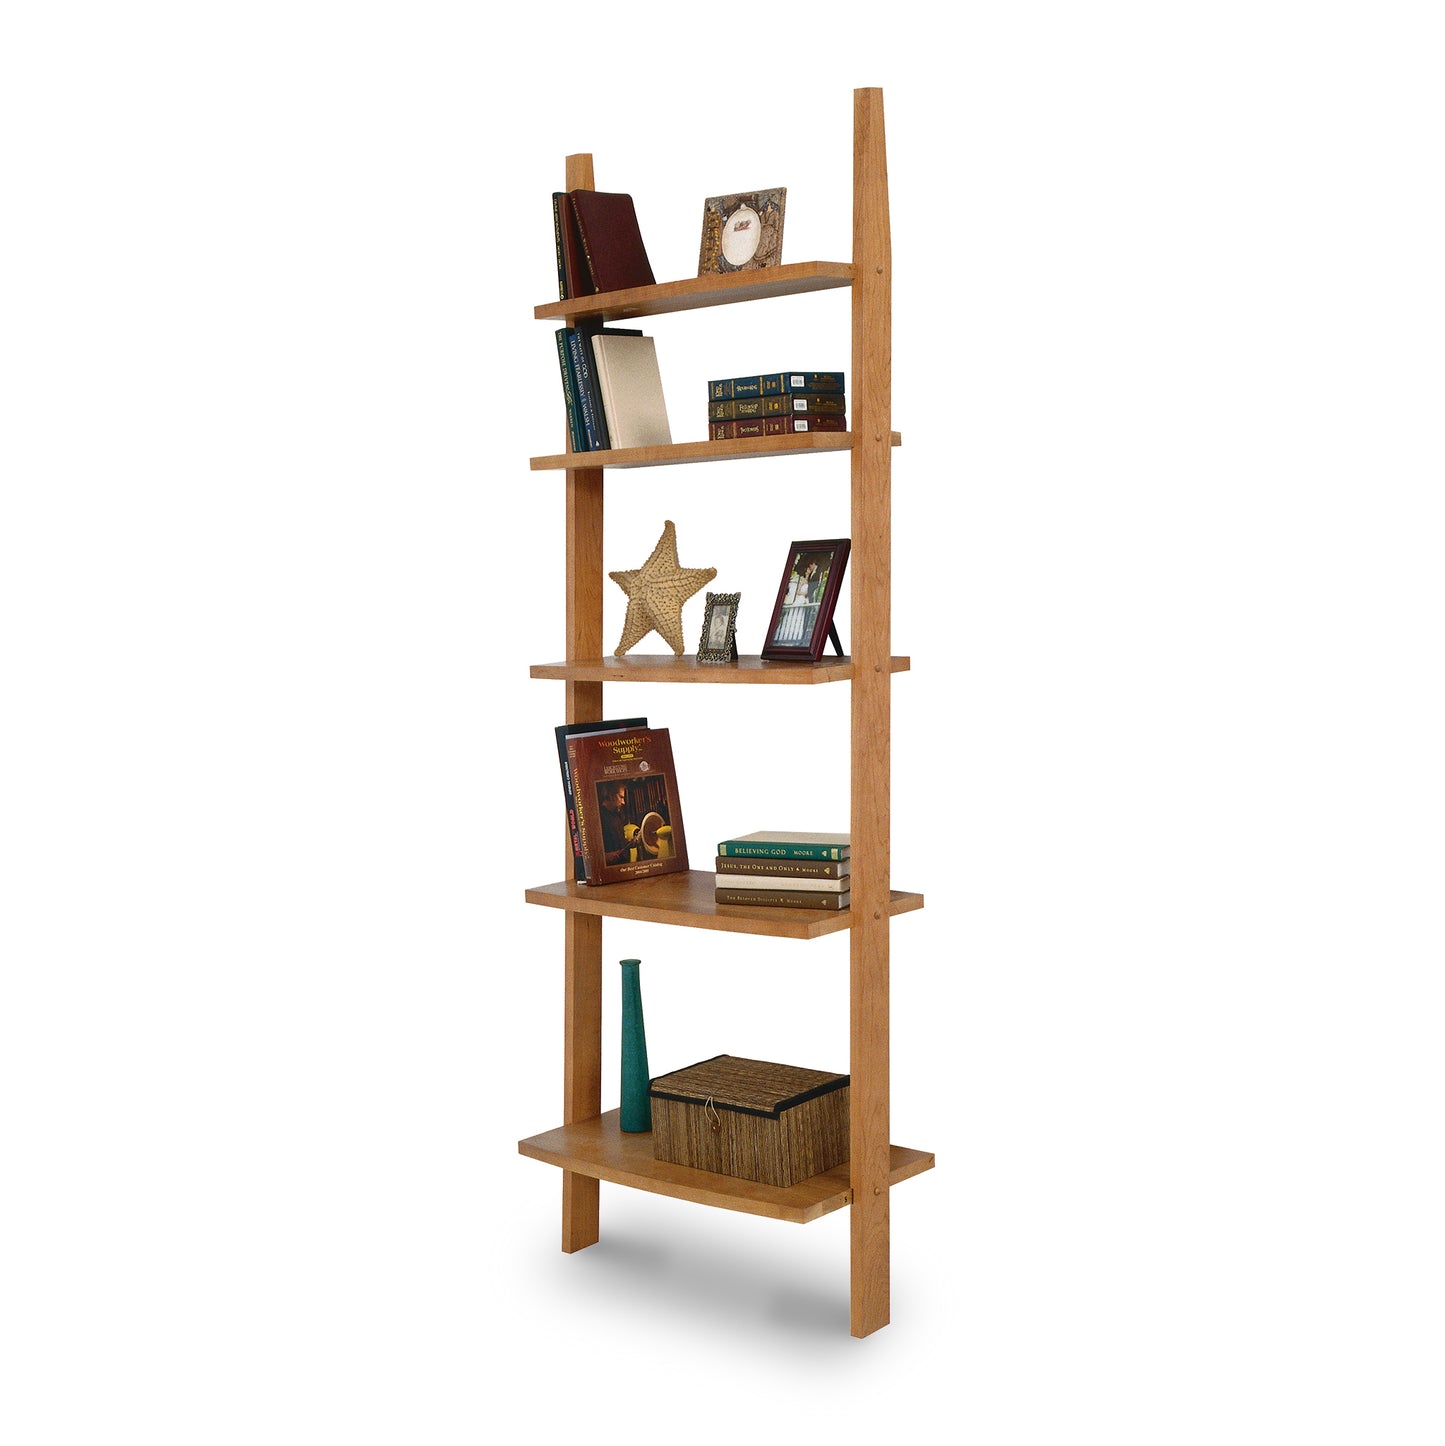 A Lyndon Furniture Open Ladder Bookcase with shelves filled with books.